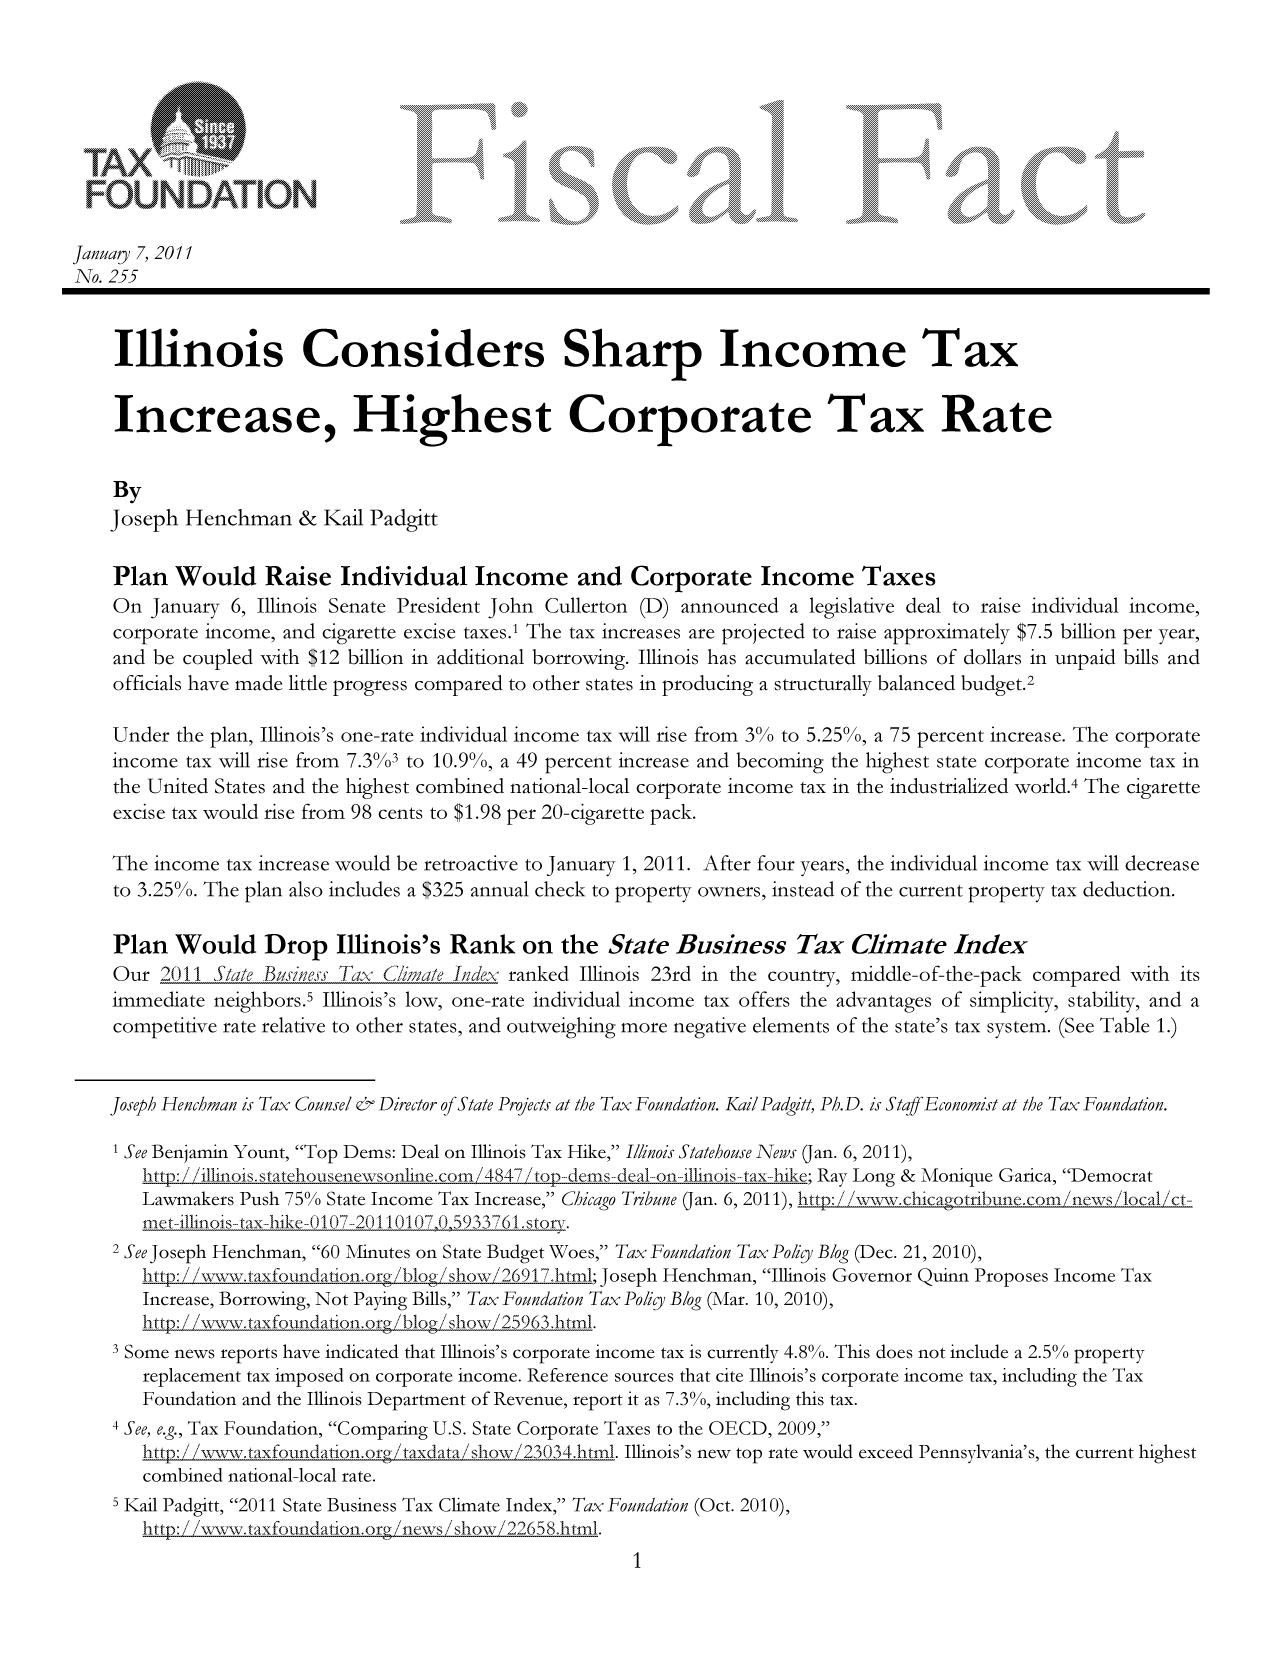 handle is hein.taxfoundation/ffcffxz0001 and id is 1 raw text is: 9F  N D A T IO N  :                                        100, EN                   0 O
January 7, 2011
No. 255
Illinois Considers Sharp Income Tax
Increase, Highest Corporate Tax Rate
By
Joseph Henchman & Kail Padgitt
Plan Would Raise Individual Income and Corporate Income Taxes
On January 6, Illinois Senate President John Cullerton (D) announced a legislative deal to raise individual income,
corporate income, and cigarette excise taxes.1 The tax increases are projected to raise approximately $7.5 billion per year.
and be coupled with $12 billion in additional borrowing. Illinois has accumulated billions of dollars in unpaid bills and
officials have made little progress compared to other states in producing a structurally balanced budget.2
Under the plan, Illinois's one-rate individual income tax will rise from 3% to 5.25%, a 75 percent increase. The corporate
income tax will rise from 7.3%3 to 10.9%, a 49 percent increase and becoming the highest state corporate income tax in
the United States and the highest combined national-local corporate income tax in the industrialized world.4 The cigarette
excise tax would rise from 98 cents to $1.98 per 20-cigarette pack.
The income tax increase would be retroactive to January 1, 2011. After four years, the individual income tax will decrease
to 3.25%. The plan also includes a $325 annual check to property owners, instead of the current property tax deduction.
Plan Would Drop Illinois's Rank on the State Business Tax Climate Index
Our 2011 S/le TBuszness Tax Climate hidex ranked Illinois 23rd in the country, middle-of-the-pack compared with its
immediate neighbors.5 Illinois's low, one-rate individual income tax offers the advantages of simplicity, stability, and a
competitive rate relative to other states, and outweighing more negative elements of the state's tax system. (See Table 1.)
Joseph Henchman is Tax Counsel & Director of State Projects at the Tax Foundation. KailPadgitt, Ph.D. is Staff Economist at the Tax Foundation.
1 See Benjamin Yount, Top Dems: Deal on Illinois Tax Hike, Illinois Statehouse News (Jan. 6, 2011),
http: / illinois.statehouseniewsonline.com,/4847itop-dems-deal-on-illinois-tax-hike; Ray Long & Monique Garica, Democrat
Lawmakers Push 75% State Income Tax Increase, Chicago Tribune (Jan. 6, 2011), b:--w-w- chicagotribune-com/-ncxx s, localct-
met-illinois- tax-hike- 0107-2011010 0,5933 761.storV.
2 See Joseph Henchman, 60 Minutes on State Budget Woes, Tax Foundation Tax Polig Blog (Dec. 21, 2010),
http: w/Iw.taxfoundation org.b!0g. show,'i691.html; Joseph Henchman, Illinois Governor Quinn Proposes Income Tax
Increase, Borrowing, Not Paying Bills, Tax Foundation Tax Poli y Blog (Mar. 10, 2010),
ht/iwwwx\taxfoundationorg blog, show! 25963.htm.
3Some news reports have indicated that Illinois's corporate income tax is currently 4.80%. This does not include a 2.50% property
replacement tax imposed on corporate income. Reference sources that cite Illinois's corporate income tax, including the Tax
Foundation and the Illinois Department of Revenue, report it as 7.30%, including this tax.
4 See, eg, Tax Foundation, Comparing U.S. State Corporate Taxes to the OECD, 2009,
ww  txtunato  or  adt   hw 2303 4.h ml. Illinois's new top rate would exceed Pennsylvania's, the current highest
combined national-local rate.
sKail Padgitt, 2011 State Business Tax Climate Index, Tax Foundation (Oct. 2010),
http.i !wxvwtaxfoundation.org ne ,-s show  :22658.html.


